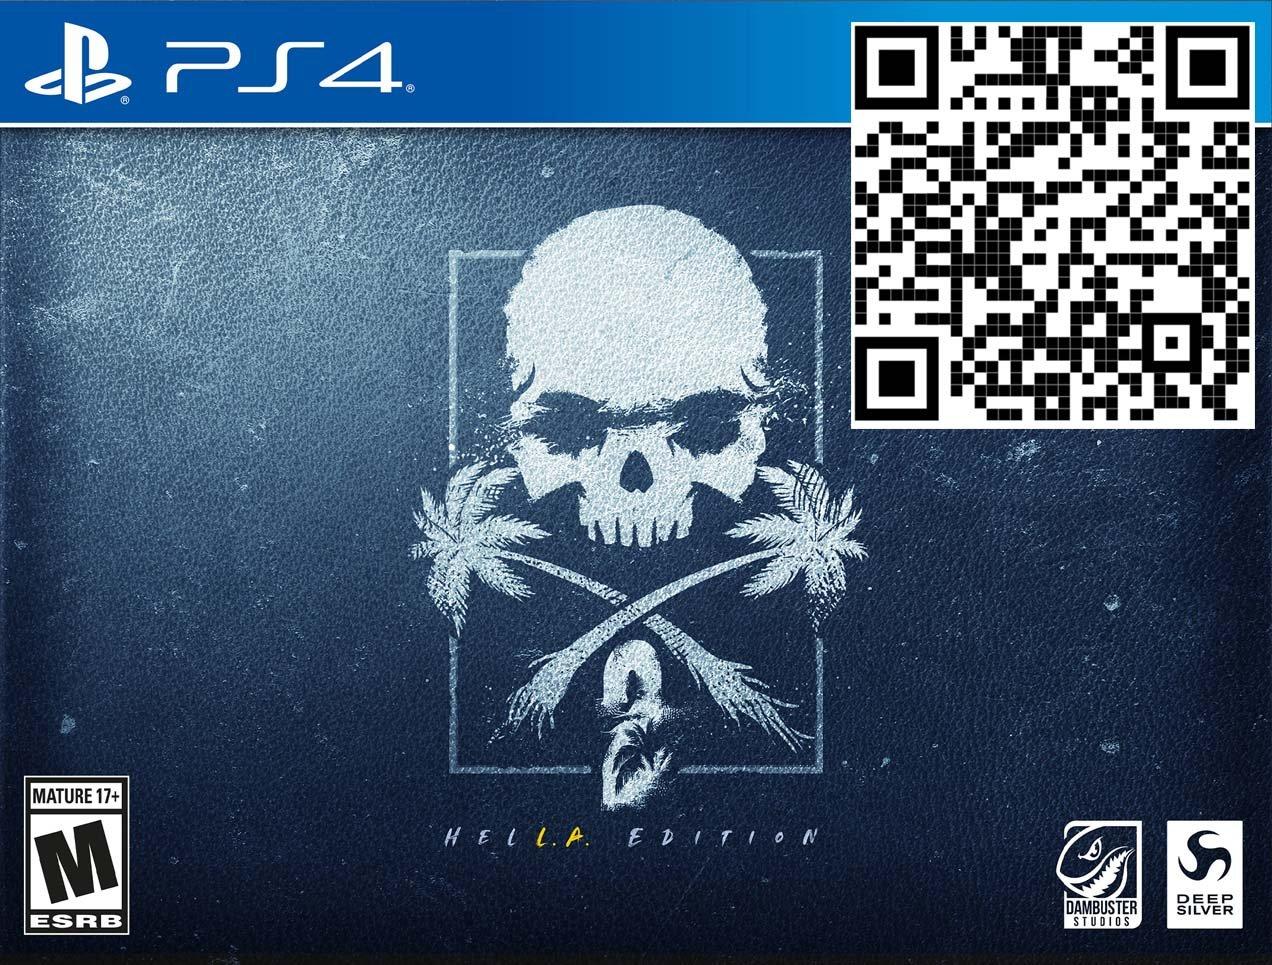 How to login using QR CODE IN PS4 